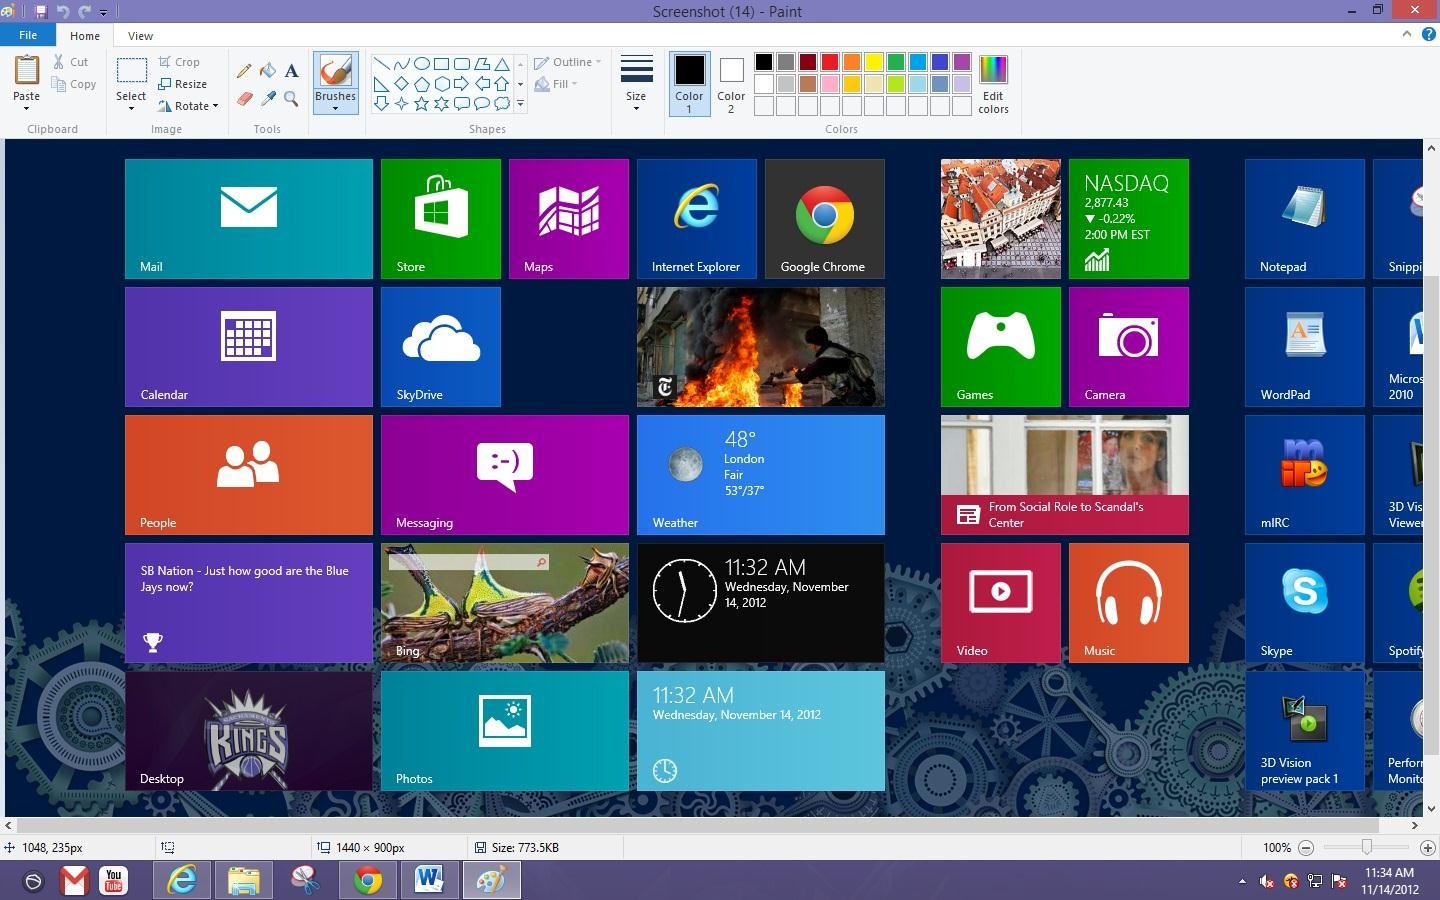 How To Take Screenshots And Crop Them In Windows 8 2019 Free